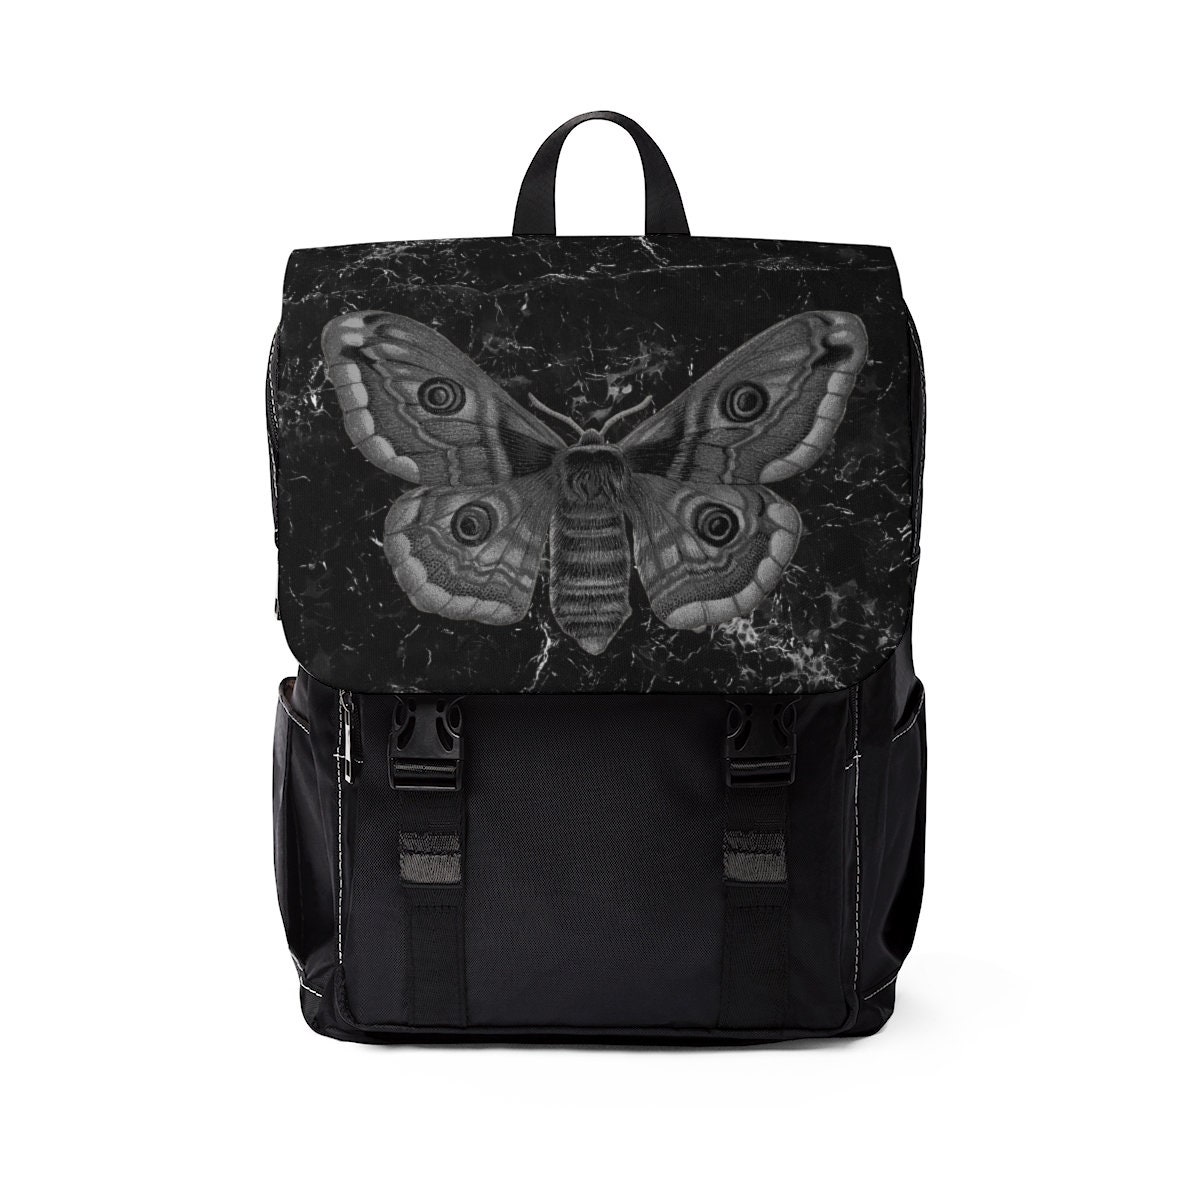 Discover Magic Goth Moth Goth Backpack  Unisex Casual Shoulder Backpacks